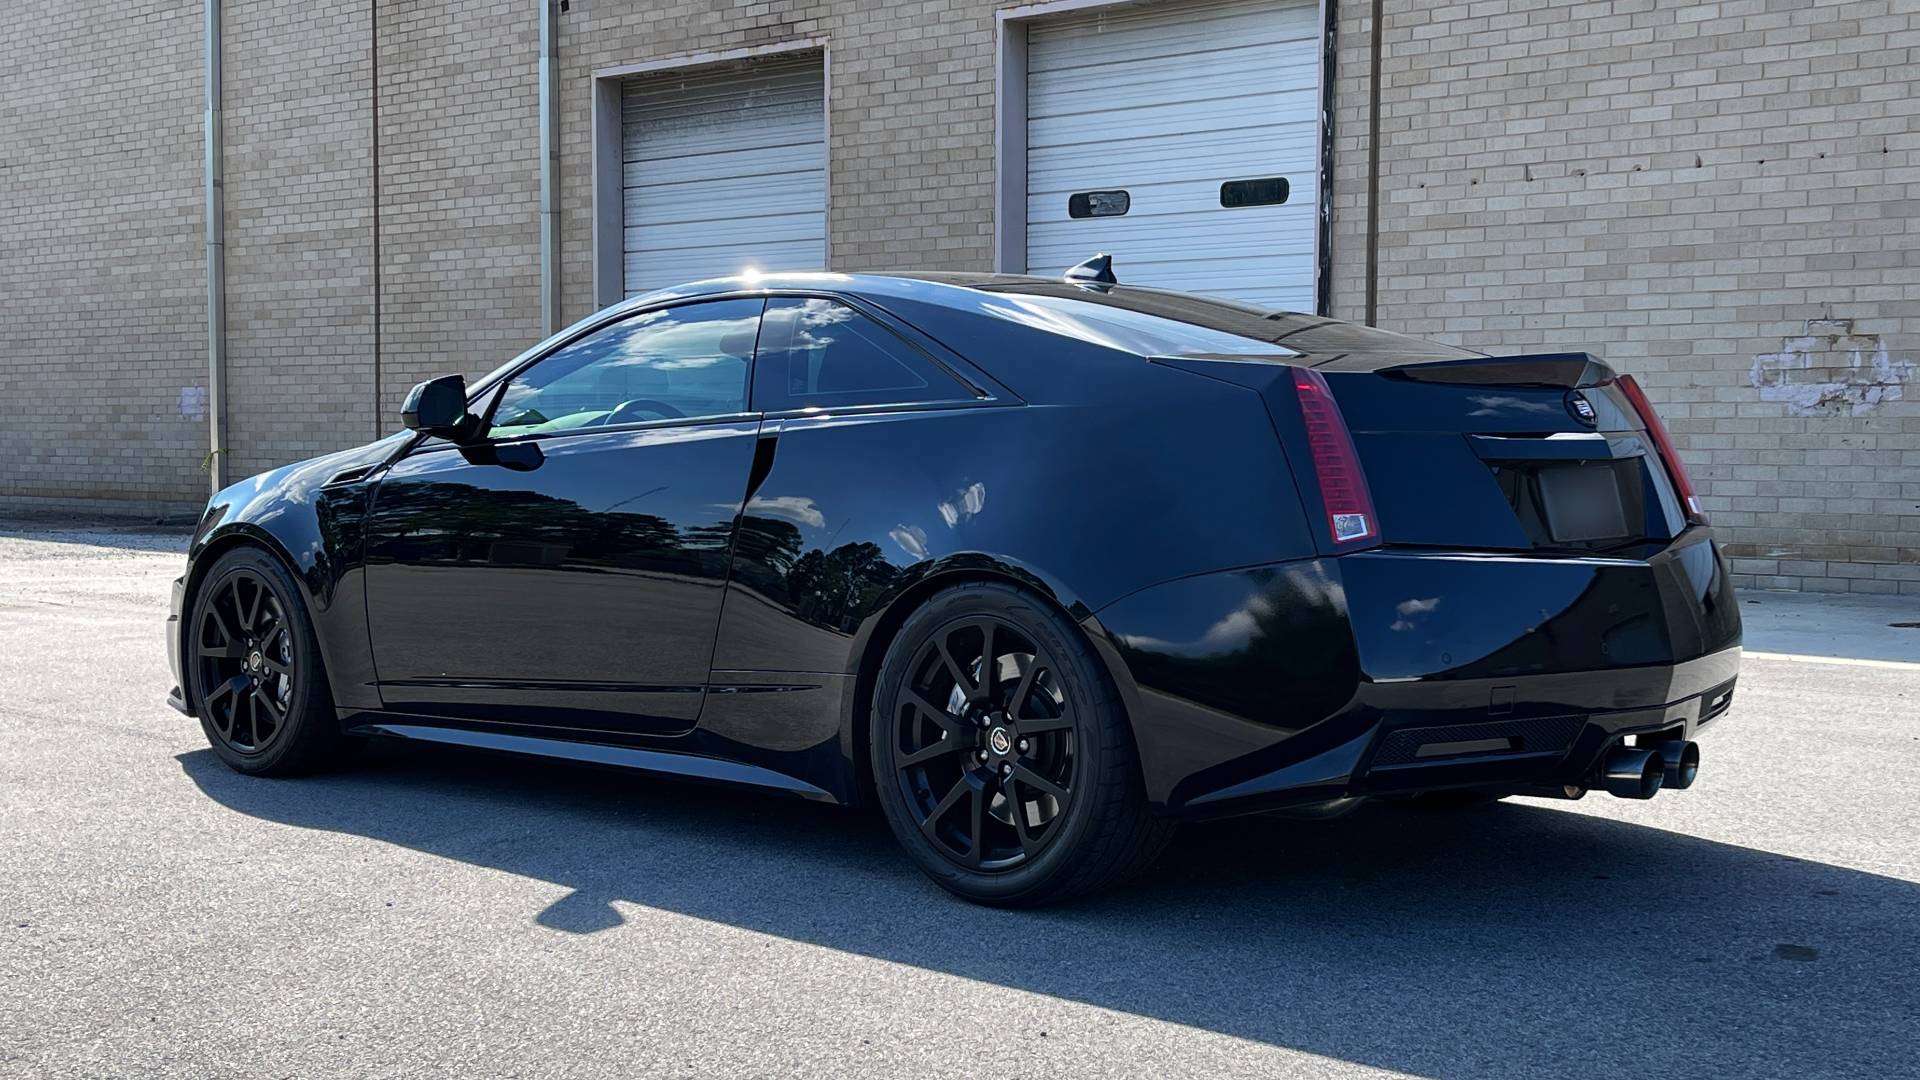 Used 2011 Cadillac CTS-V COUPE 6.2L 600HP+ / NAV / BOSE / SUNROOF / RECARO / 19IN WHLS / REARVIEW for sale Sold at Formula Imports in Charlotte NC 28227 5